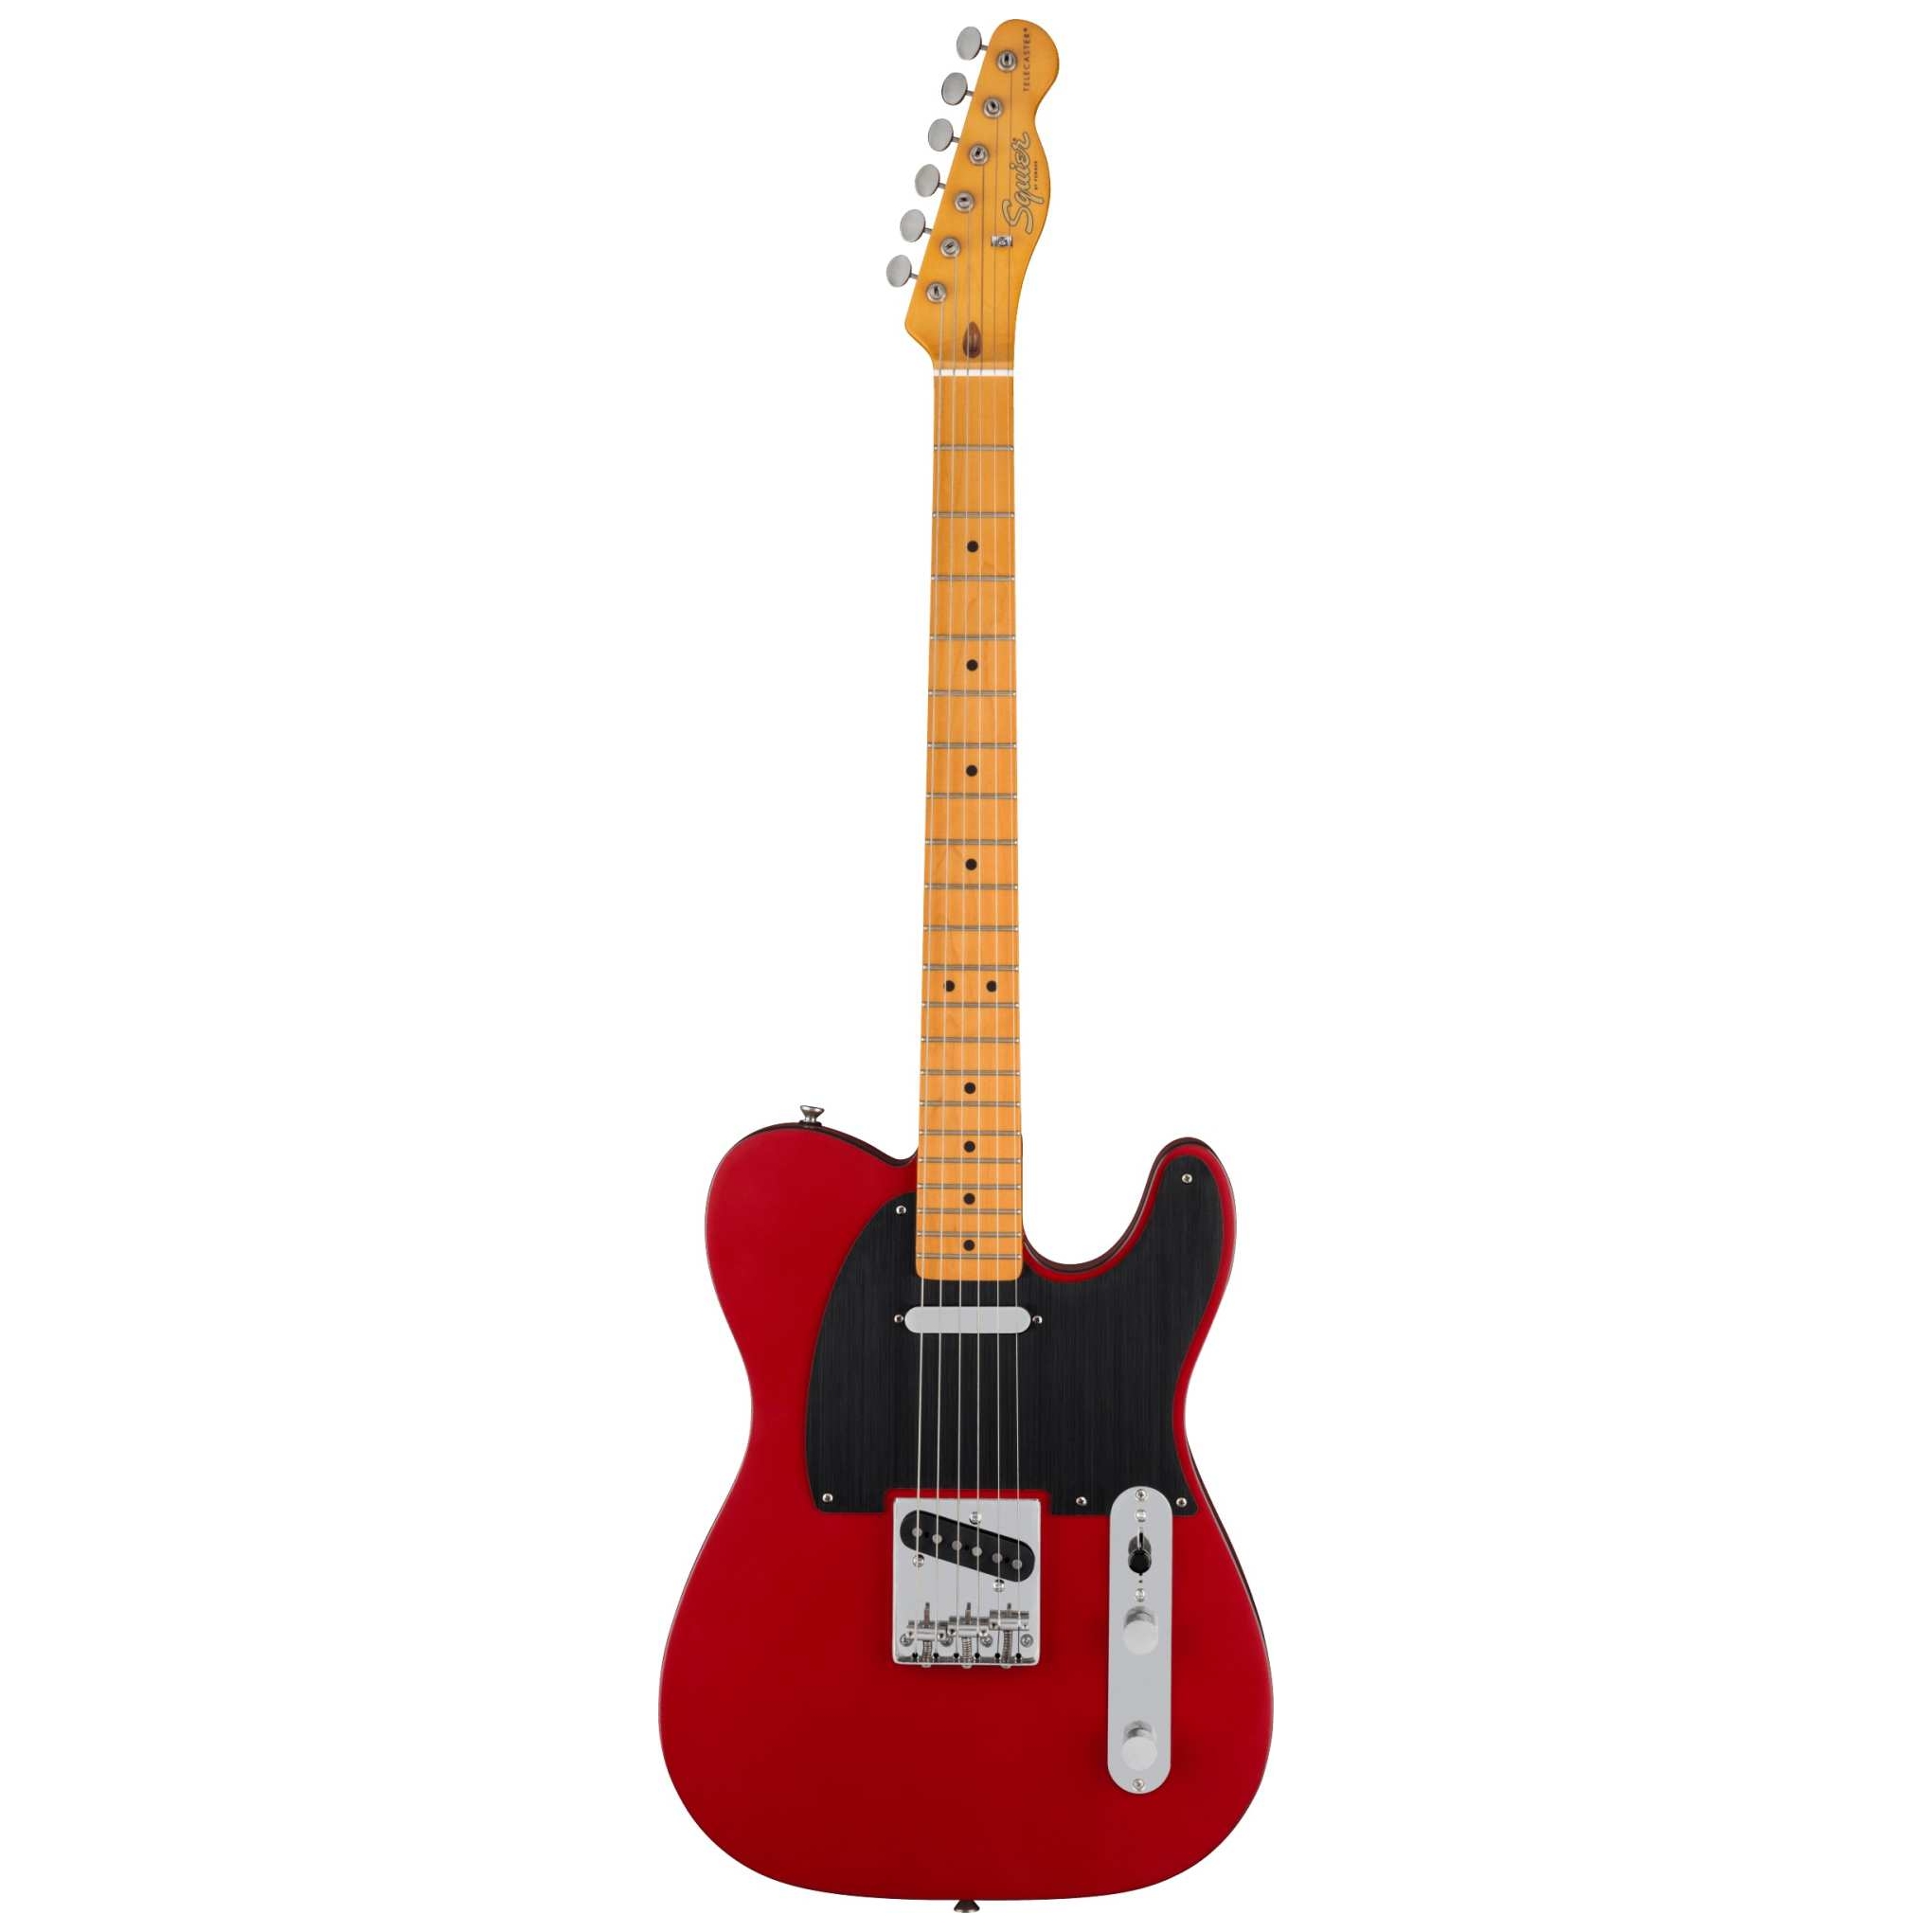 Squier by Fender 40th Anniversary Telecaster MN AHW BAPG SDKR Vintage Edition